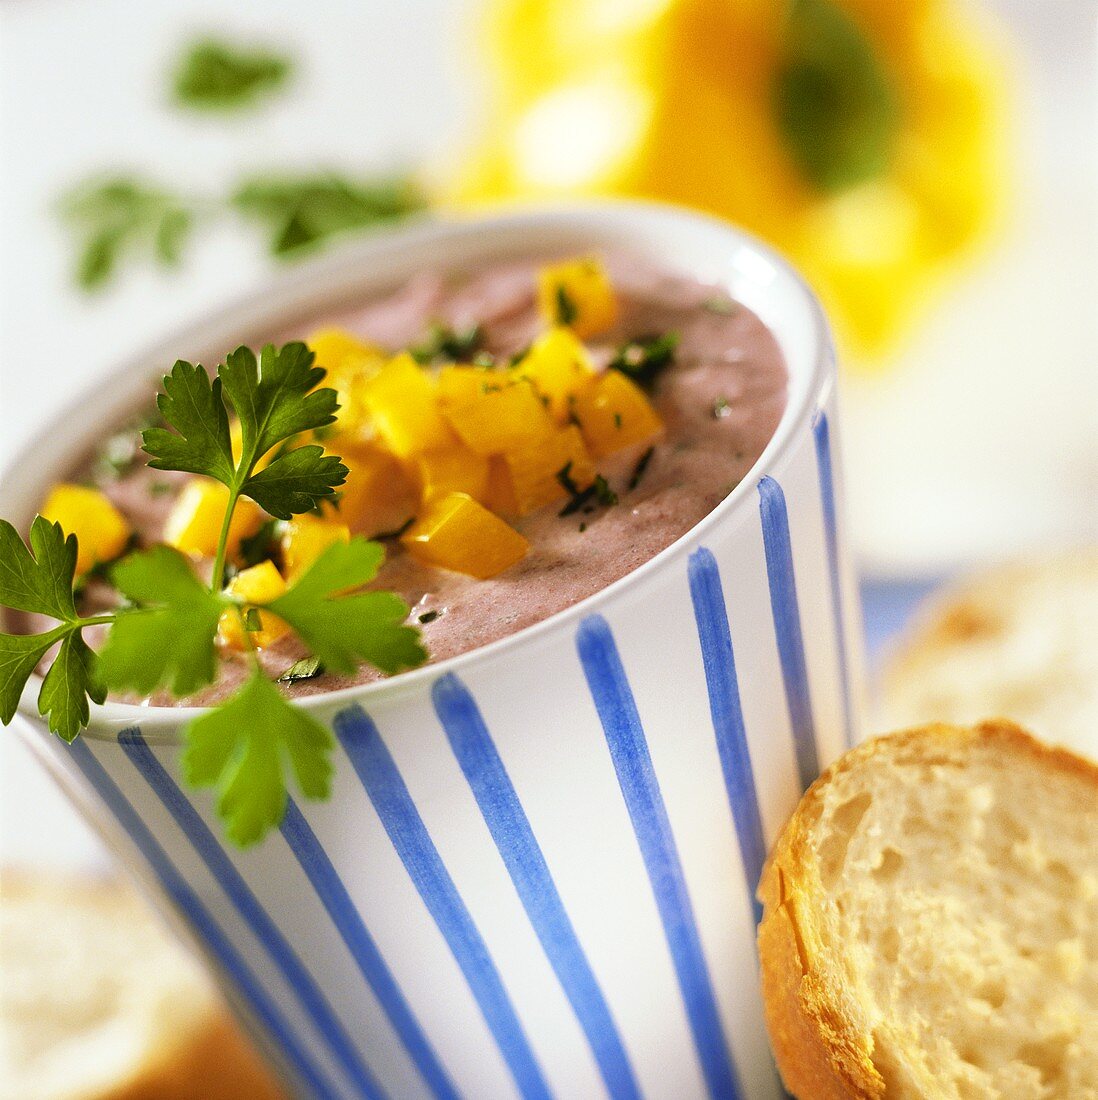 Sweetcorn dip with diced yellow peppers